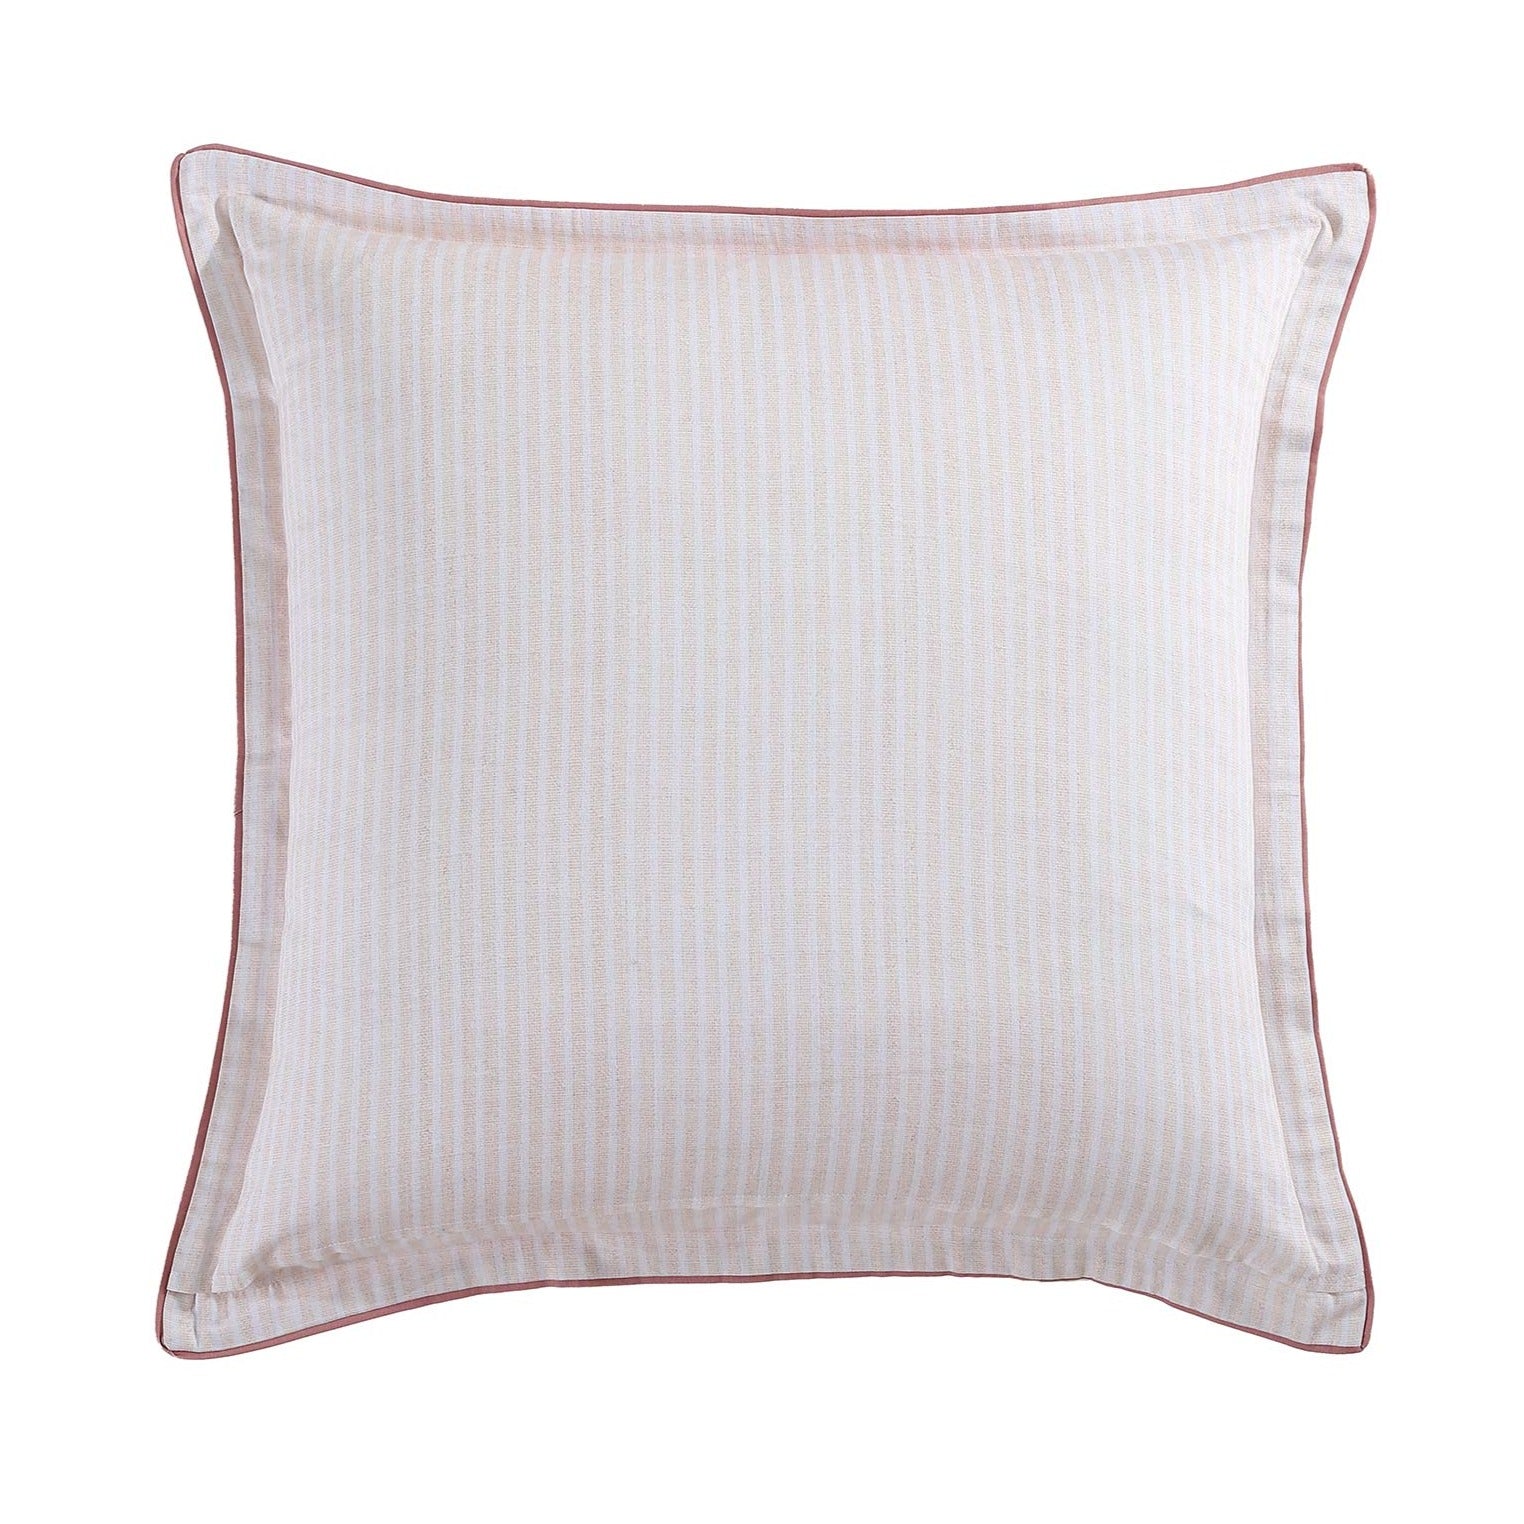 Camille Blush European Pillowcase by Private Collection